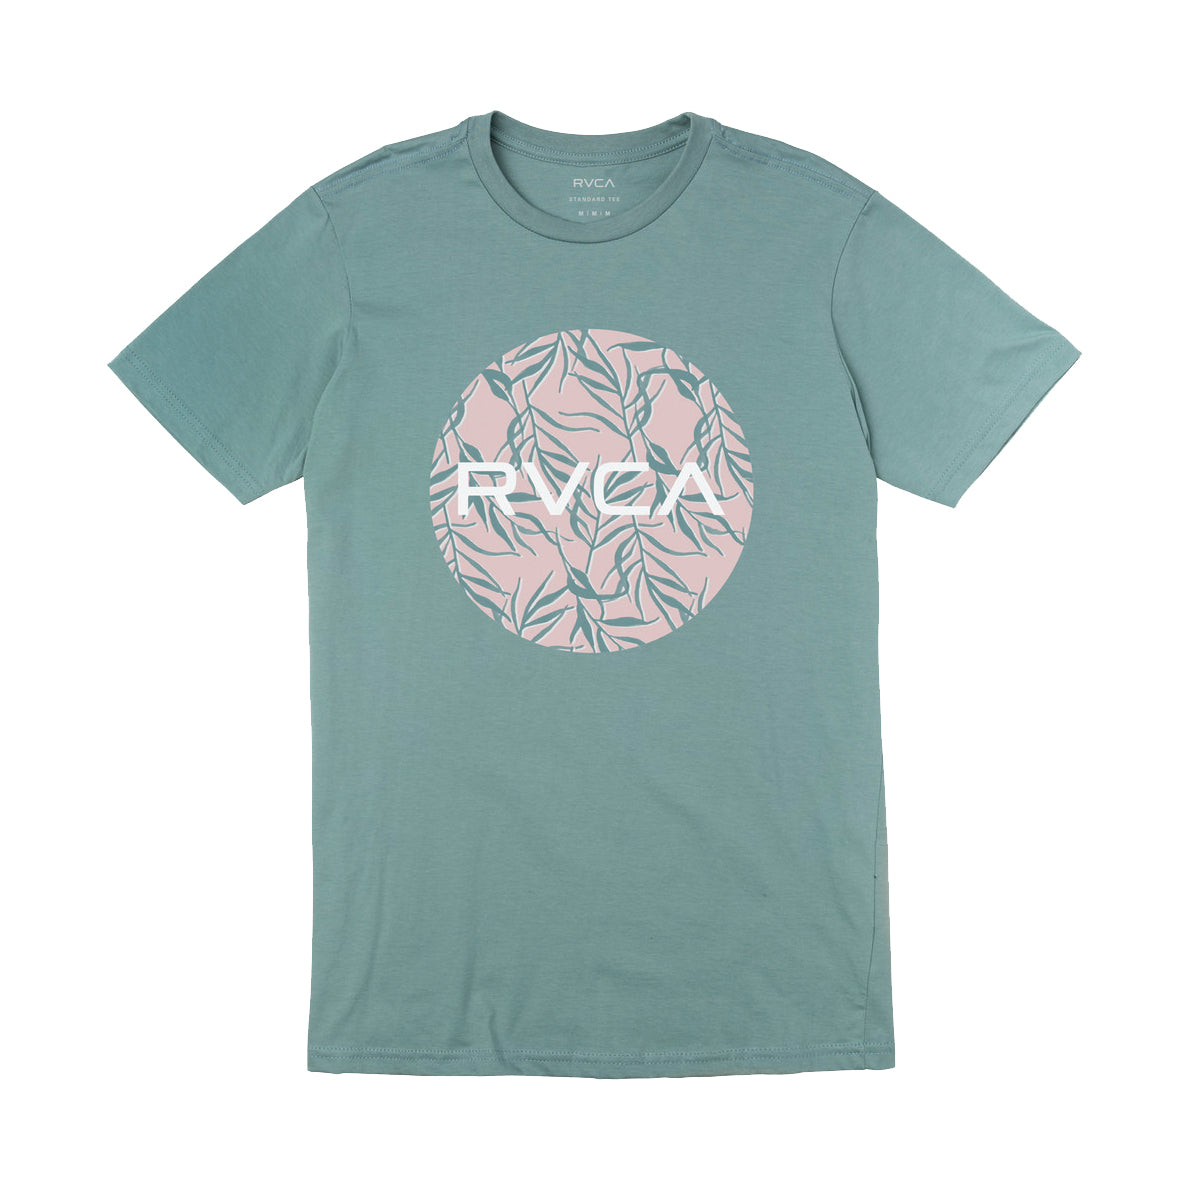 RVCA Motor Fill Tee SGN-Seagreen S